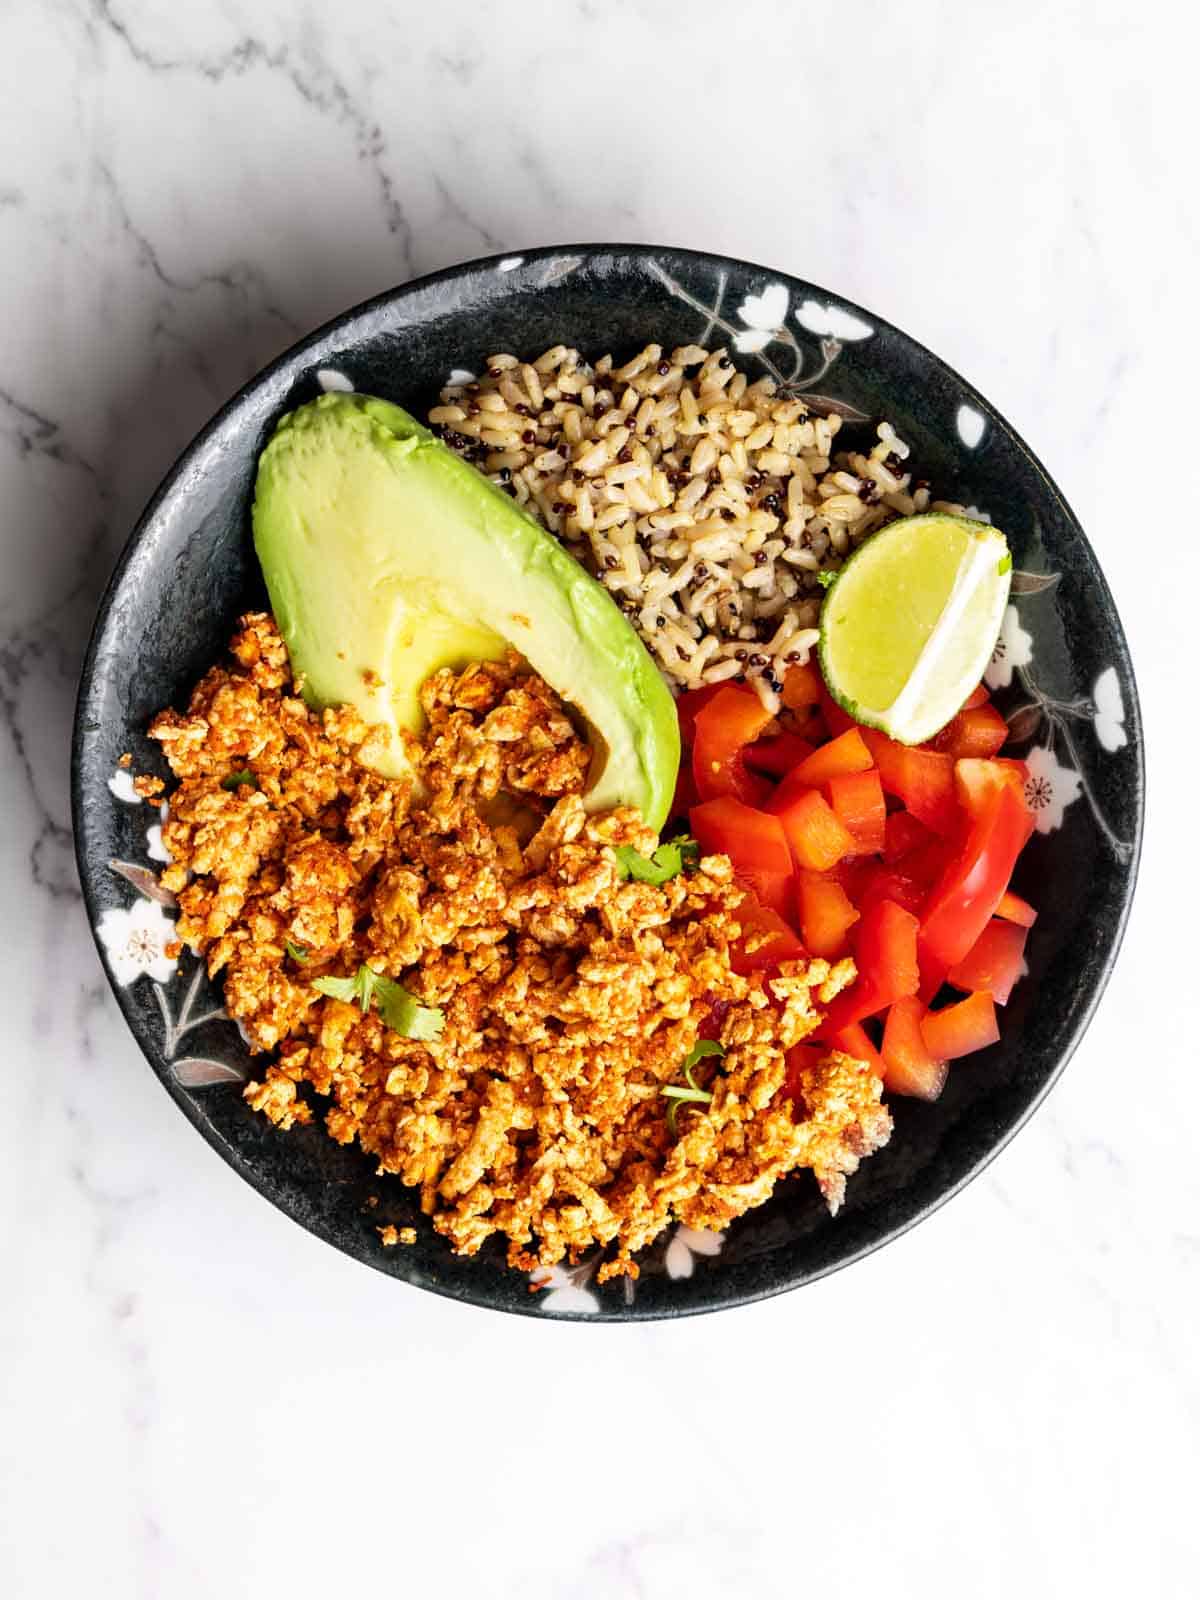 Chipotle Sofritas served in a bowl with avocado fresh bell pepper, brown rice and quinoa and a lime slice.